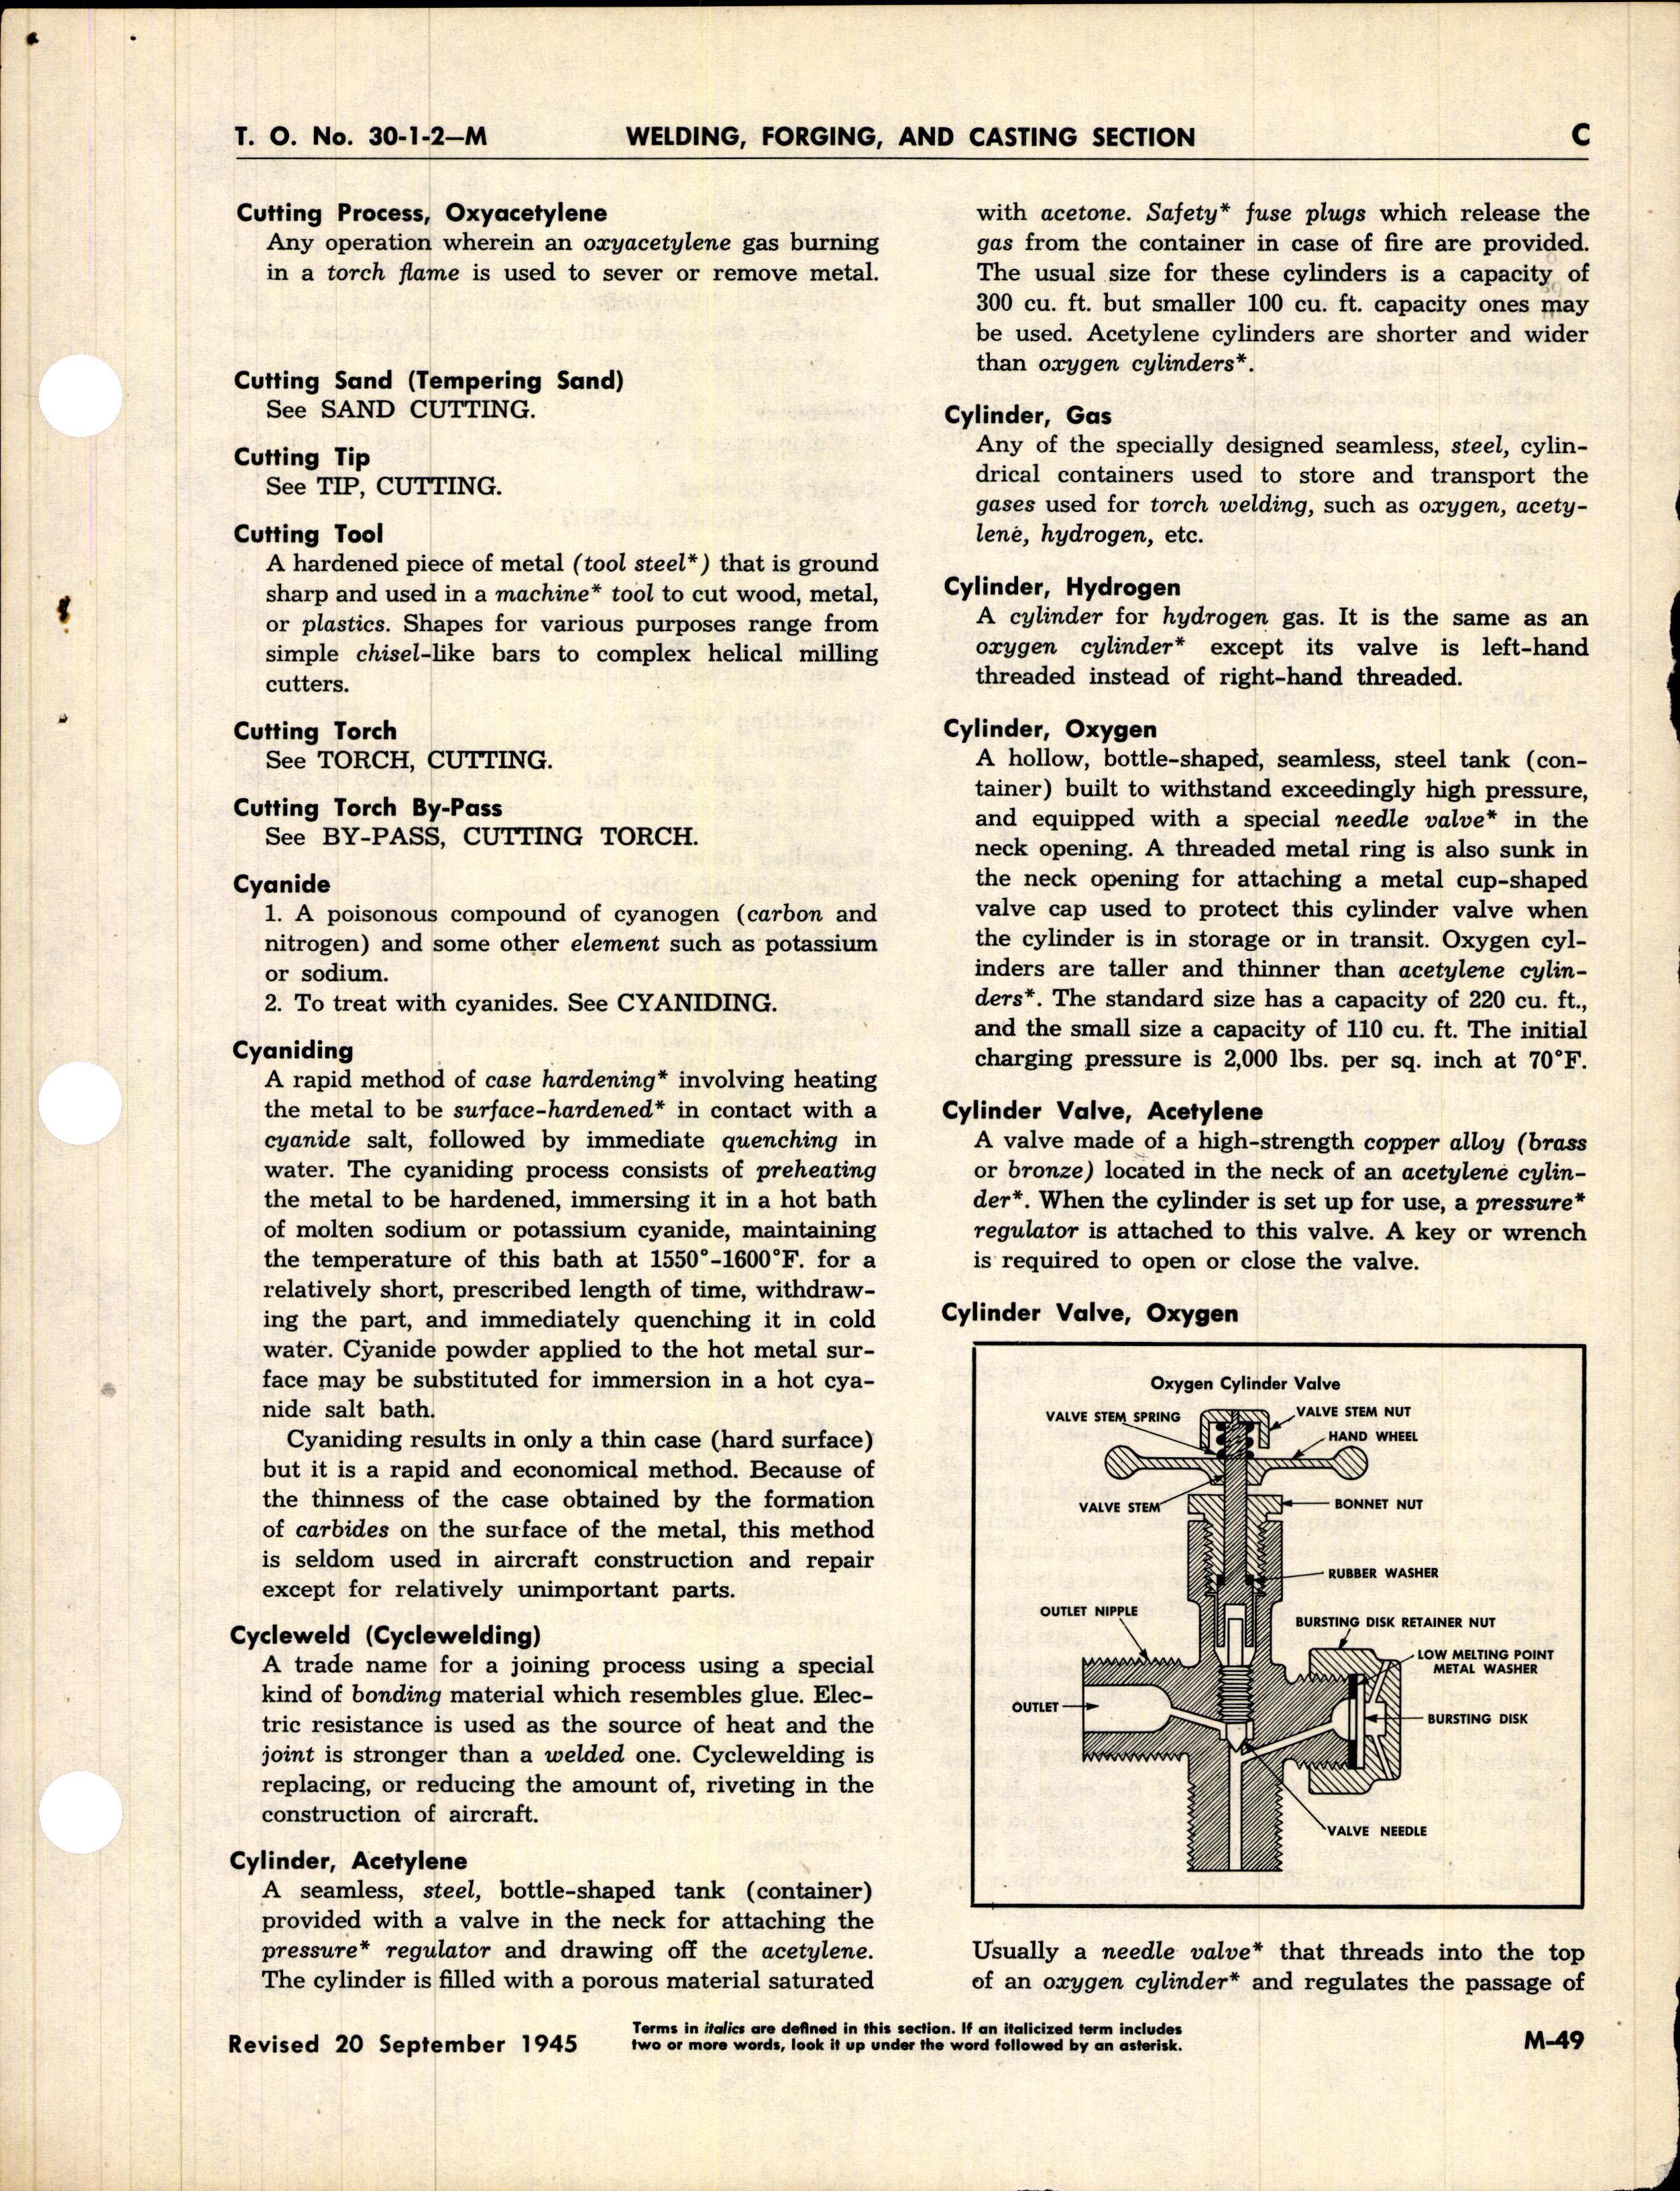 Sample page 9 from AirCorps Library document: Dictionary of Aircraft Maintenance Terms (Section M - Welding, Forging, and Casting Section)